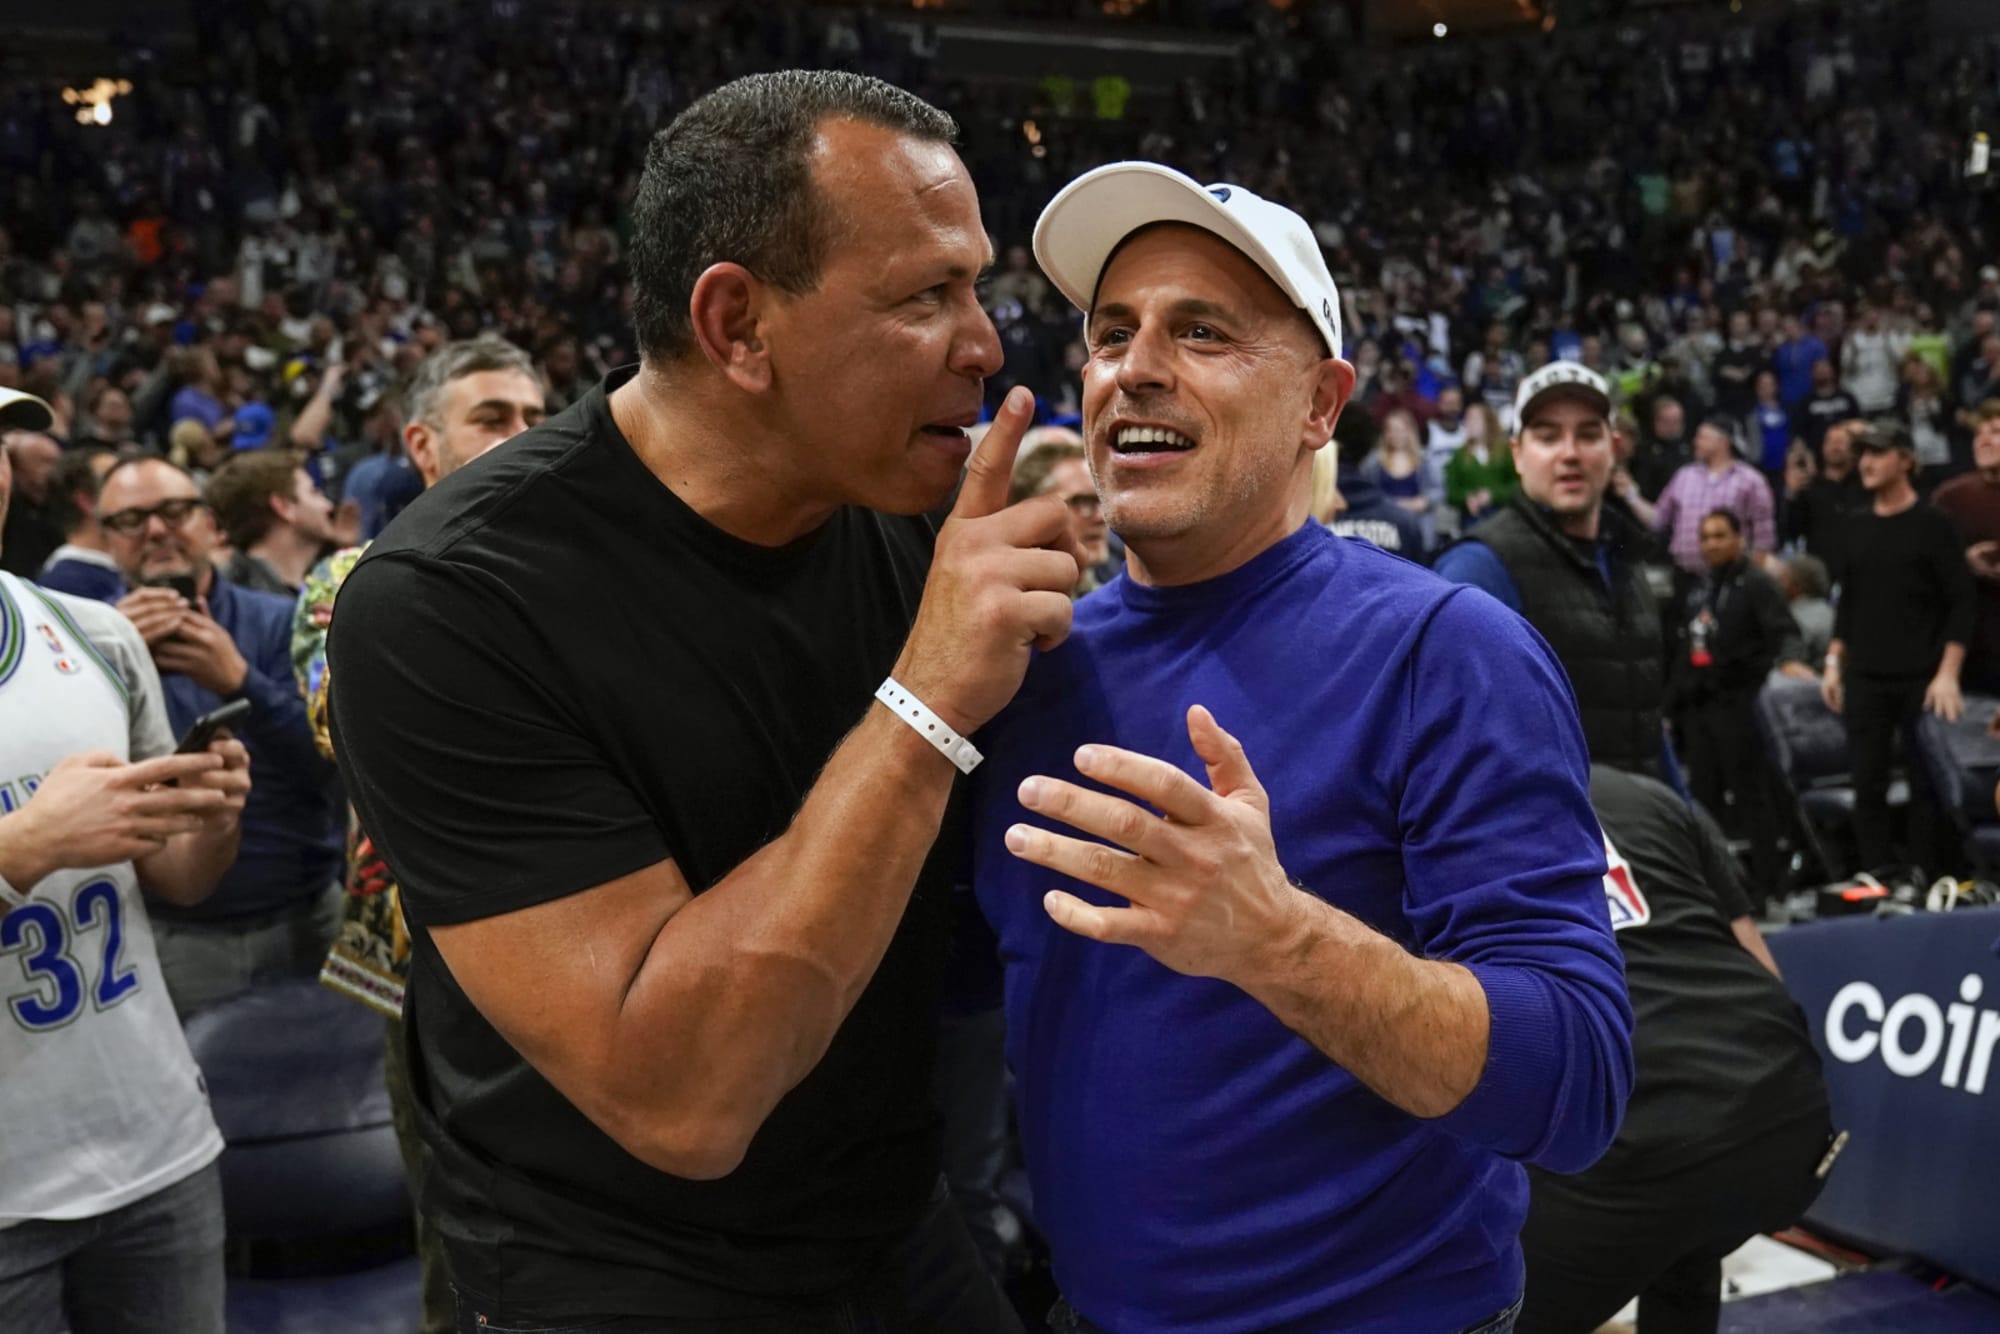 Is Alex Rodriguez the Minnesota Timberwolves owner?